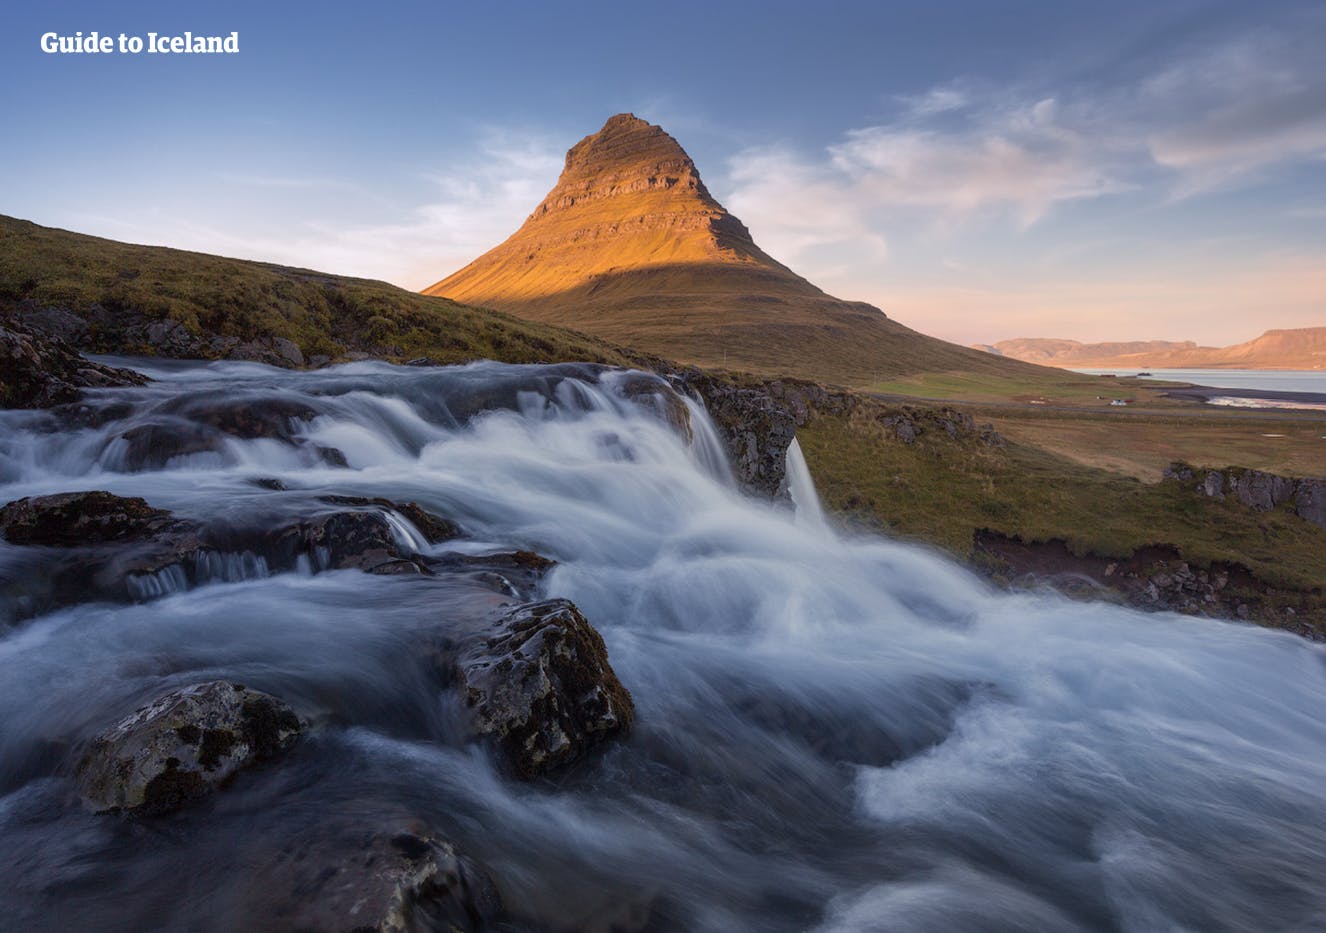 The Snæfellsnes Peninsula is filled with natural wonders like the majestic Kirkjufell mountain and the trickling waterfall in front of it